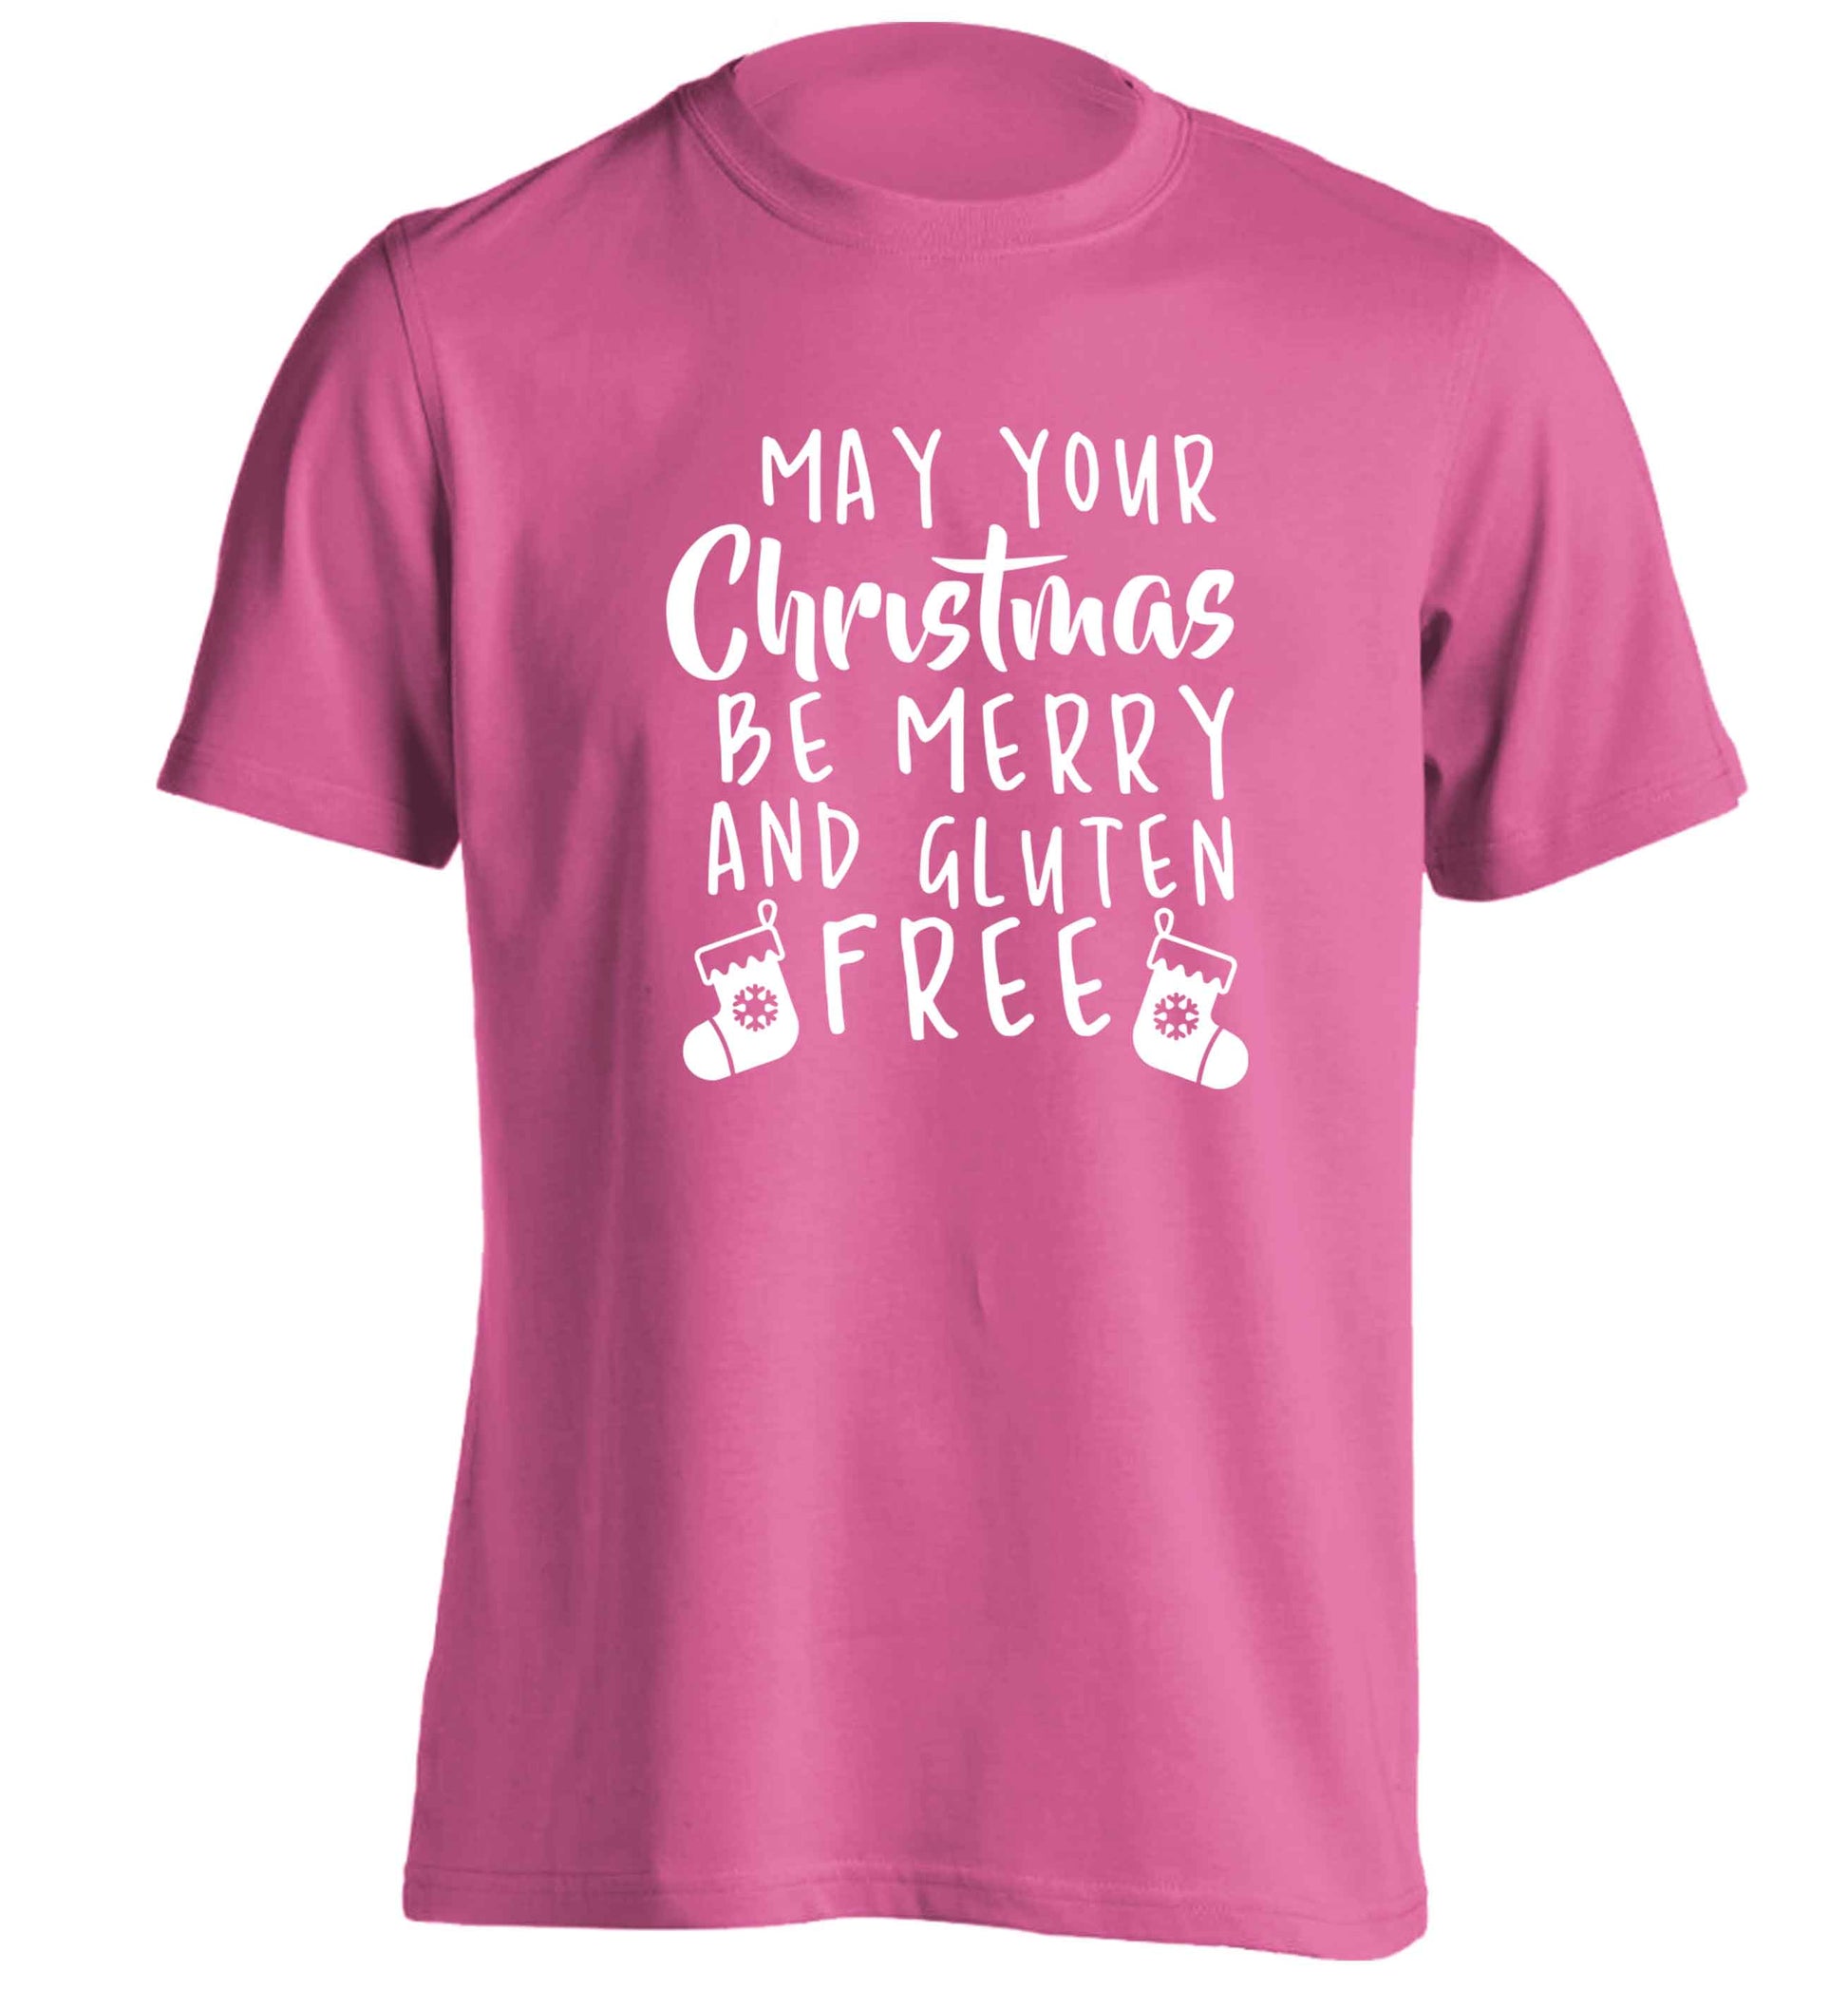 May your Christmas be merry and gluten free adults unisex pink Tshirt 2XL